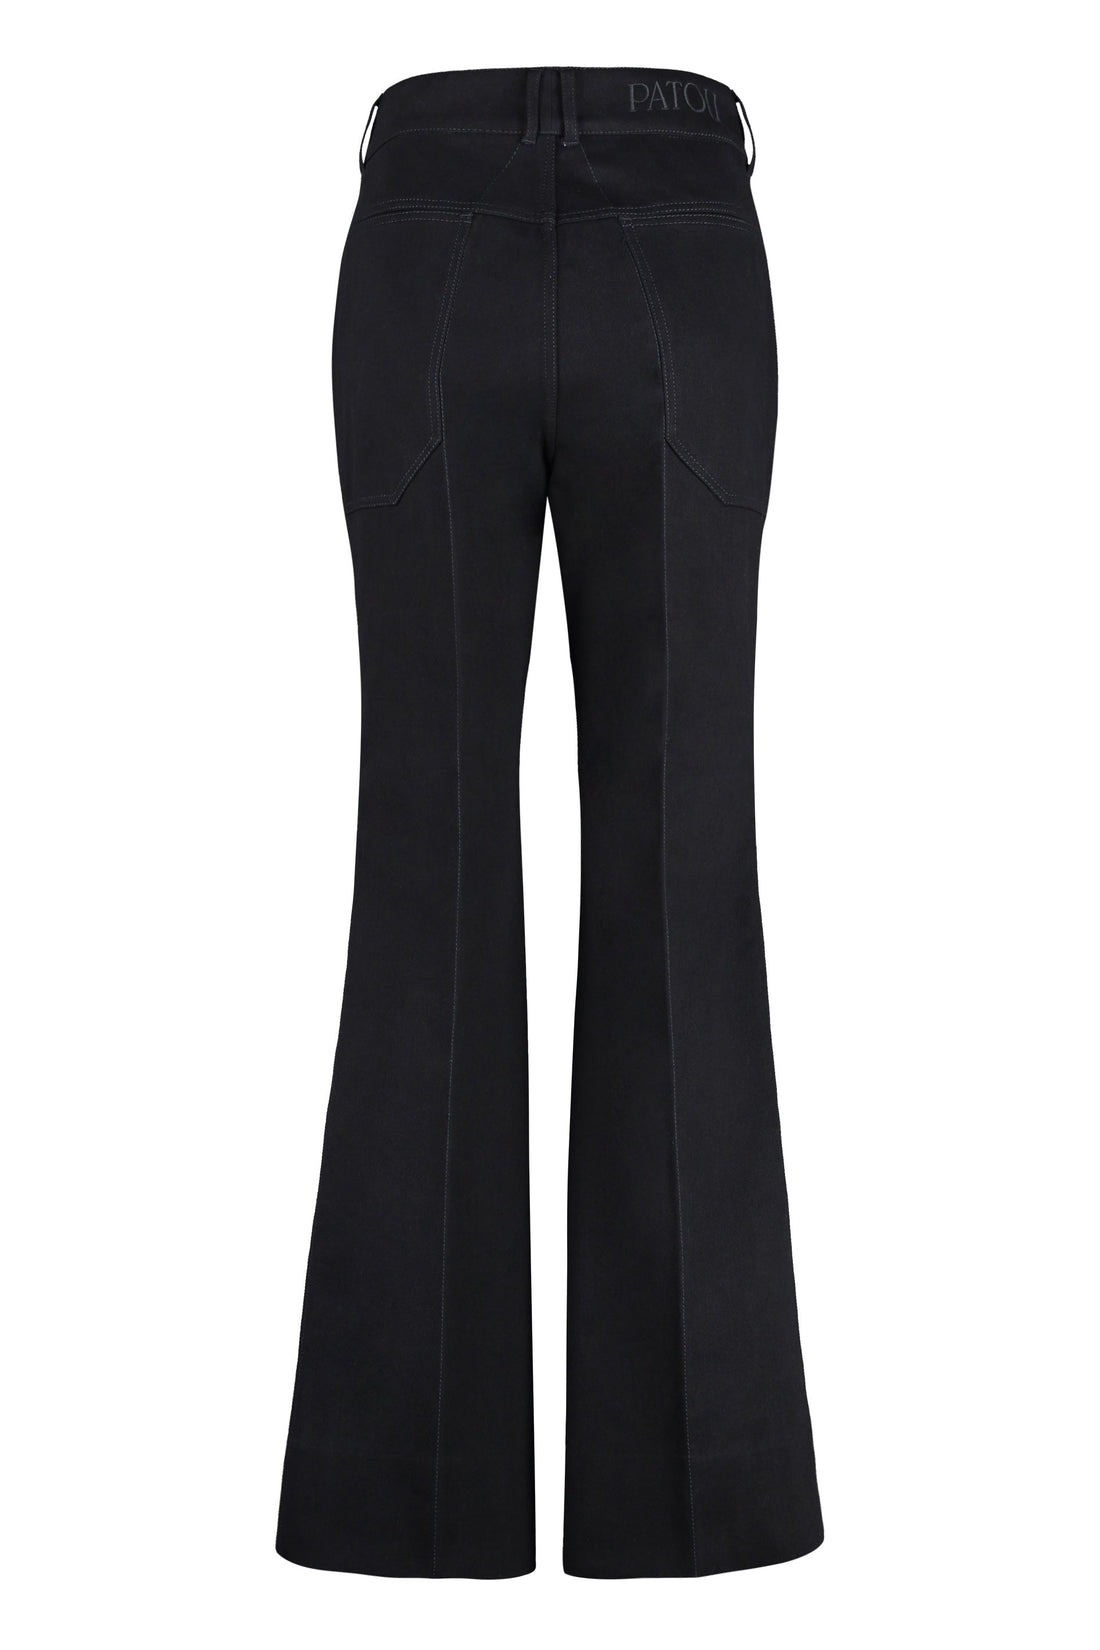 Patou-OUTLET-SALE-High-rise flared jeans-ARCHIVIST